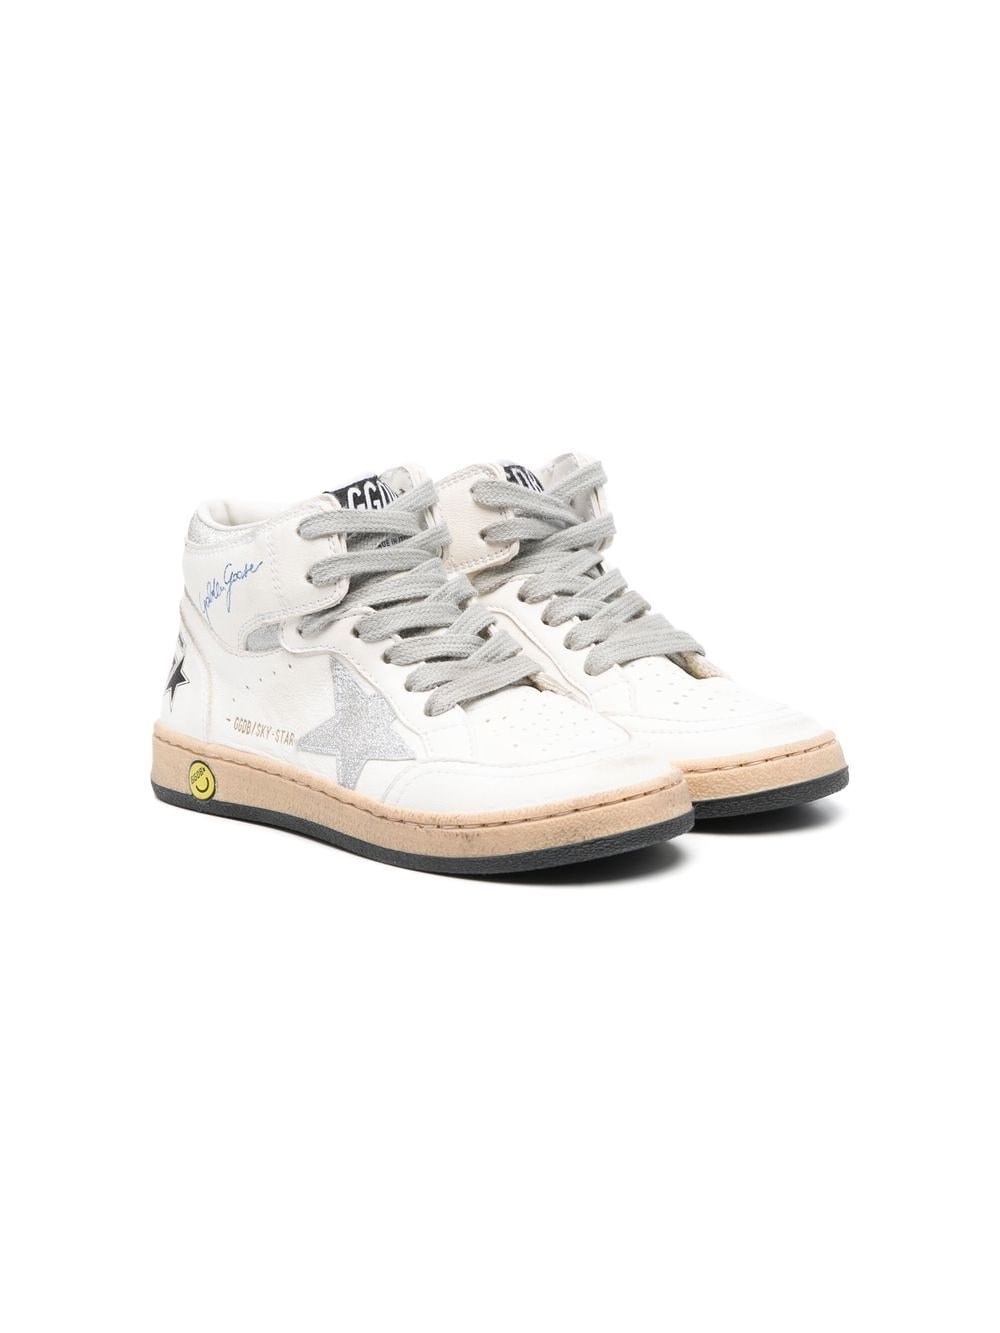 Image 1 of Golden Goose Kids high-top lace-up sneakers